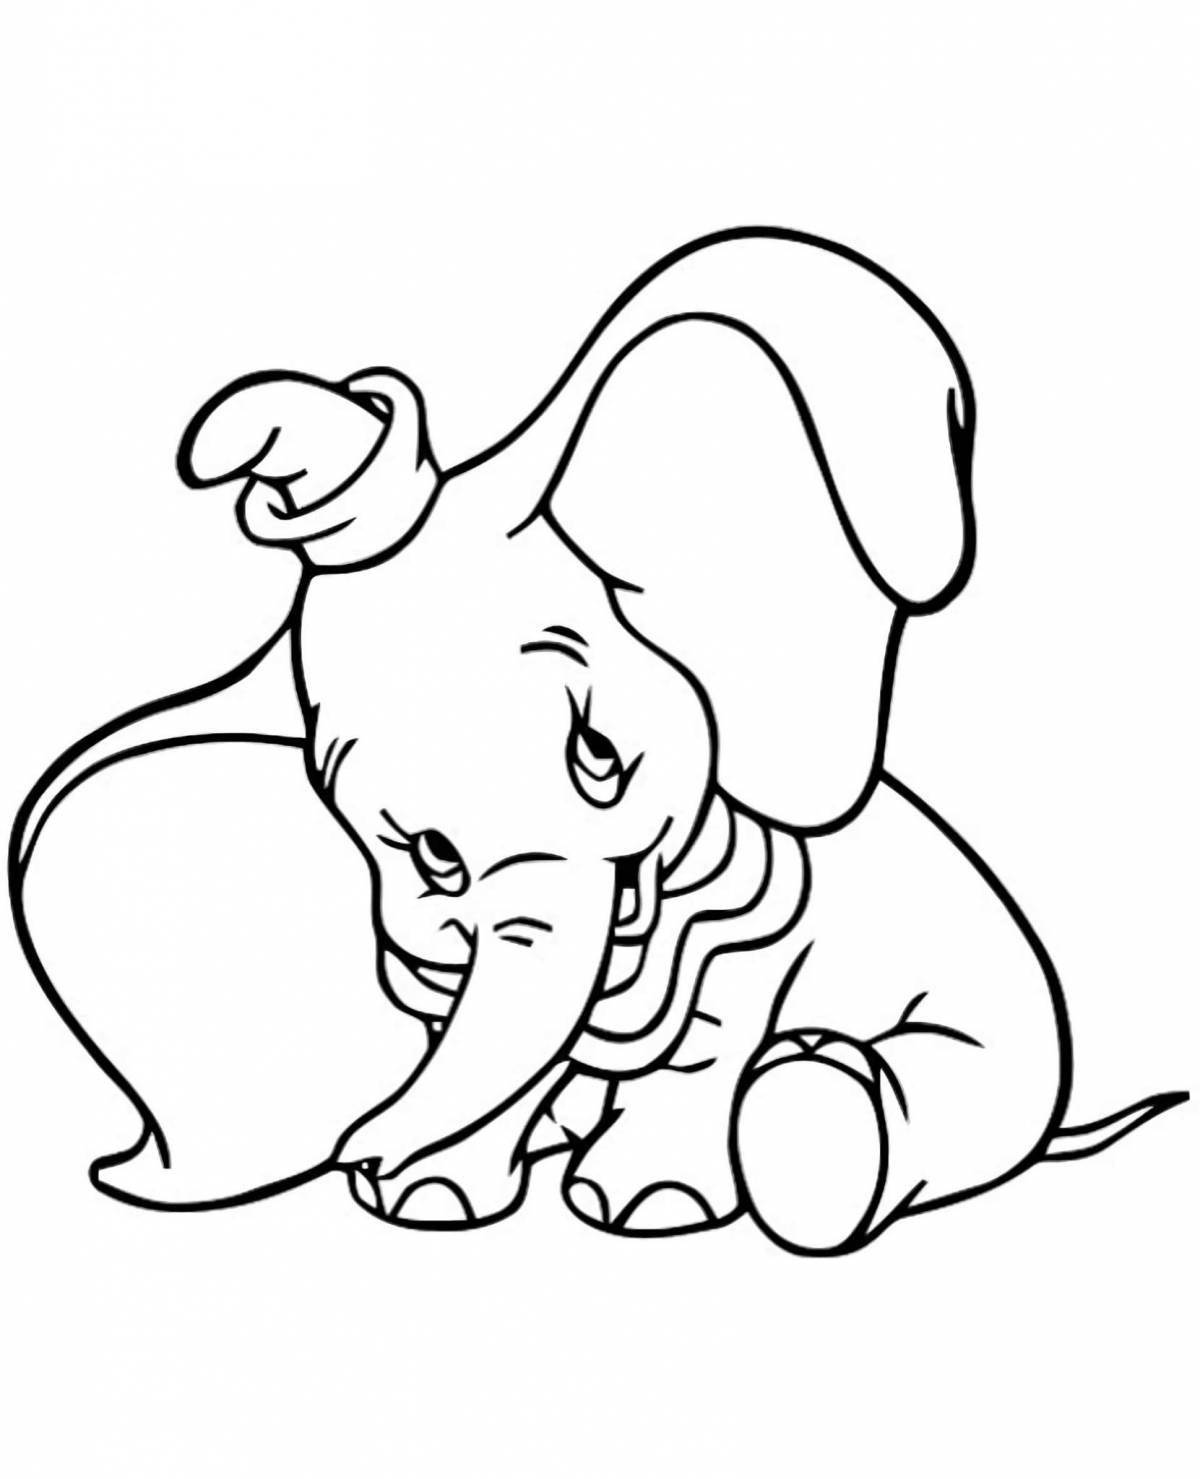 Gracious elephant coloring pages